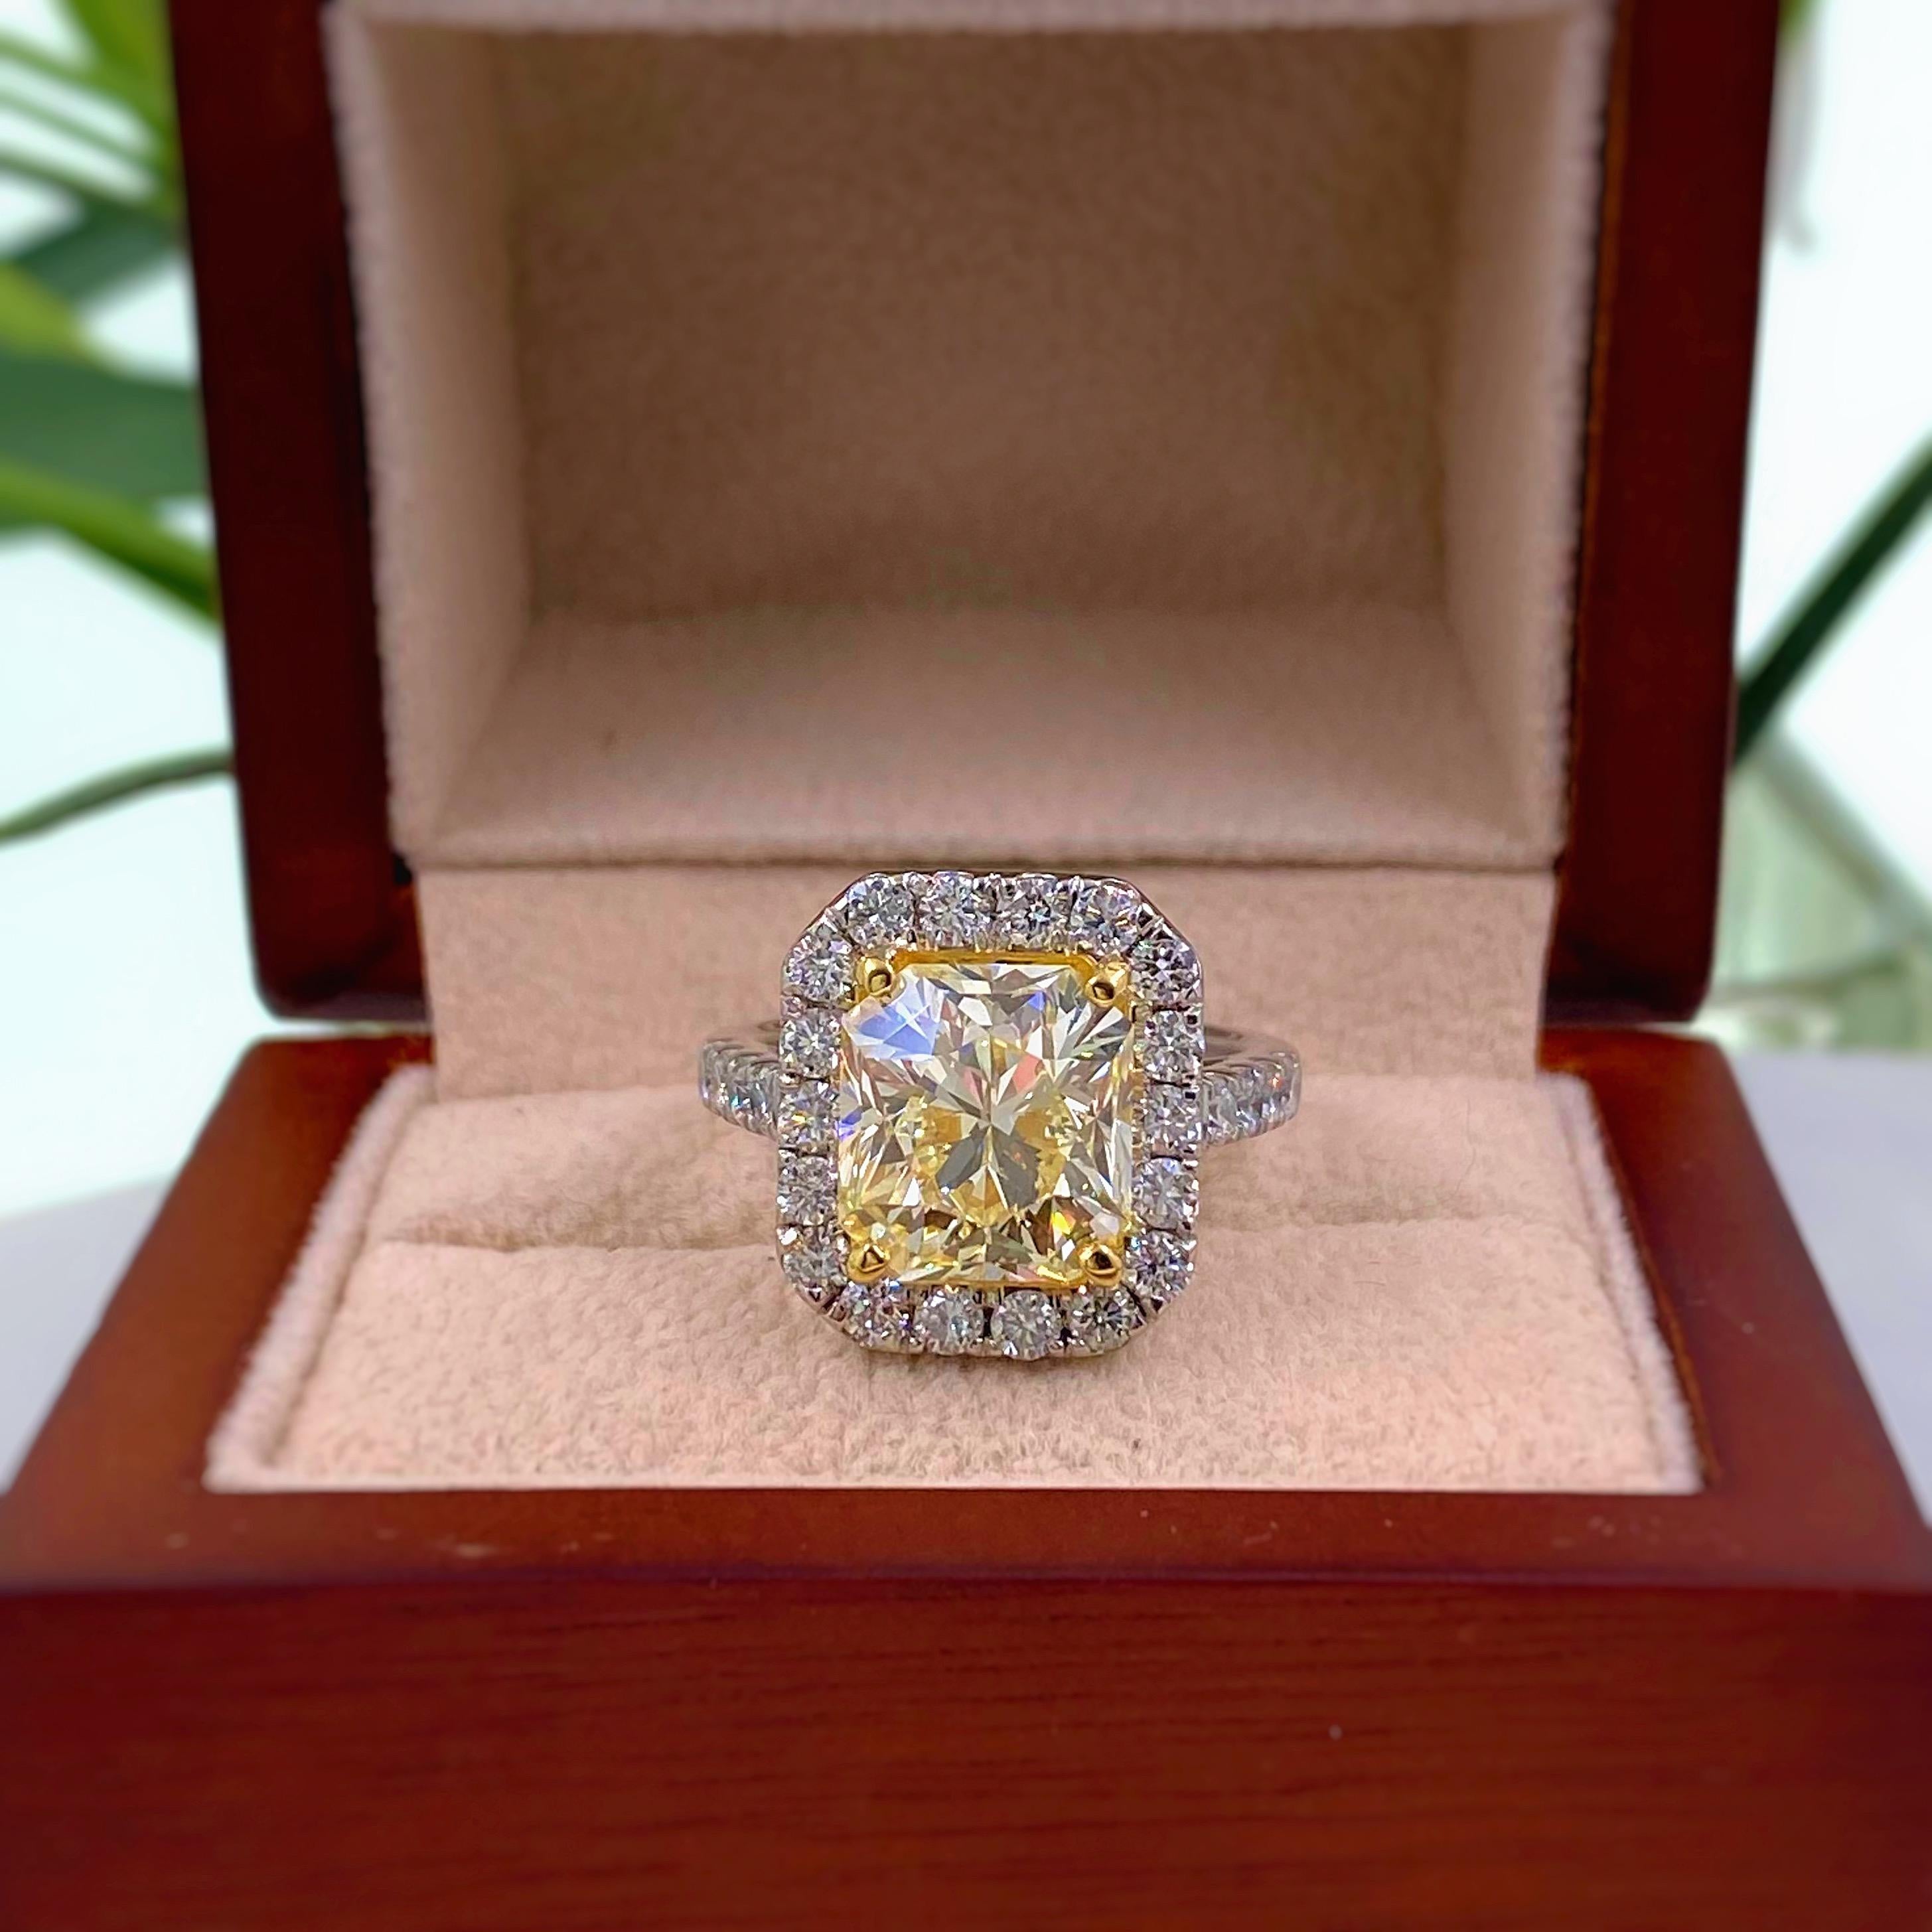 Fancy Radiant Diamond Ring

Style:  Diamond Halo Engagement Ring
GIA Report number:  2105767786
Metal:  Platinum & 18K Yellow Gold,  15.12 grams
Size / Measurements:  Ring Size 6.5
TCW:  6.03 Carats Total
Main Diamond:  5.03 Carats Radiant Cut